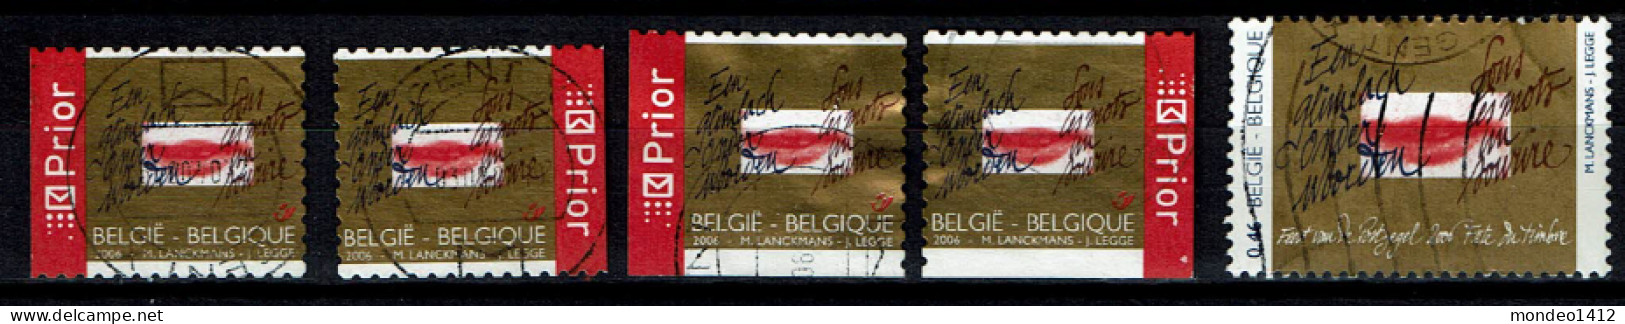 België OBP 3498/3499 - Day Of The Stamp - Used Stamps